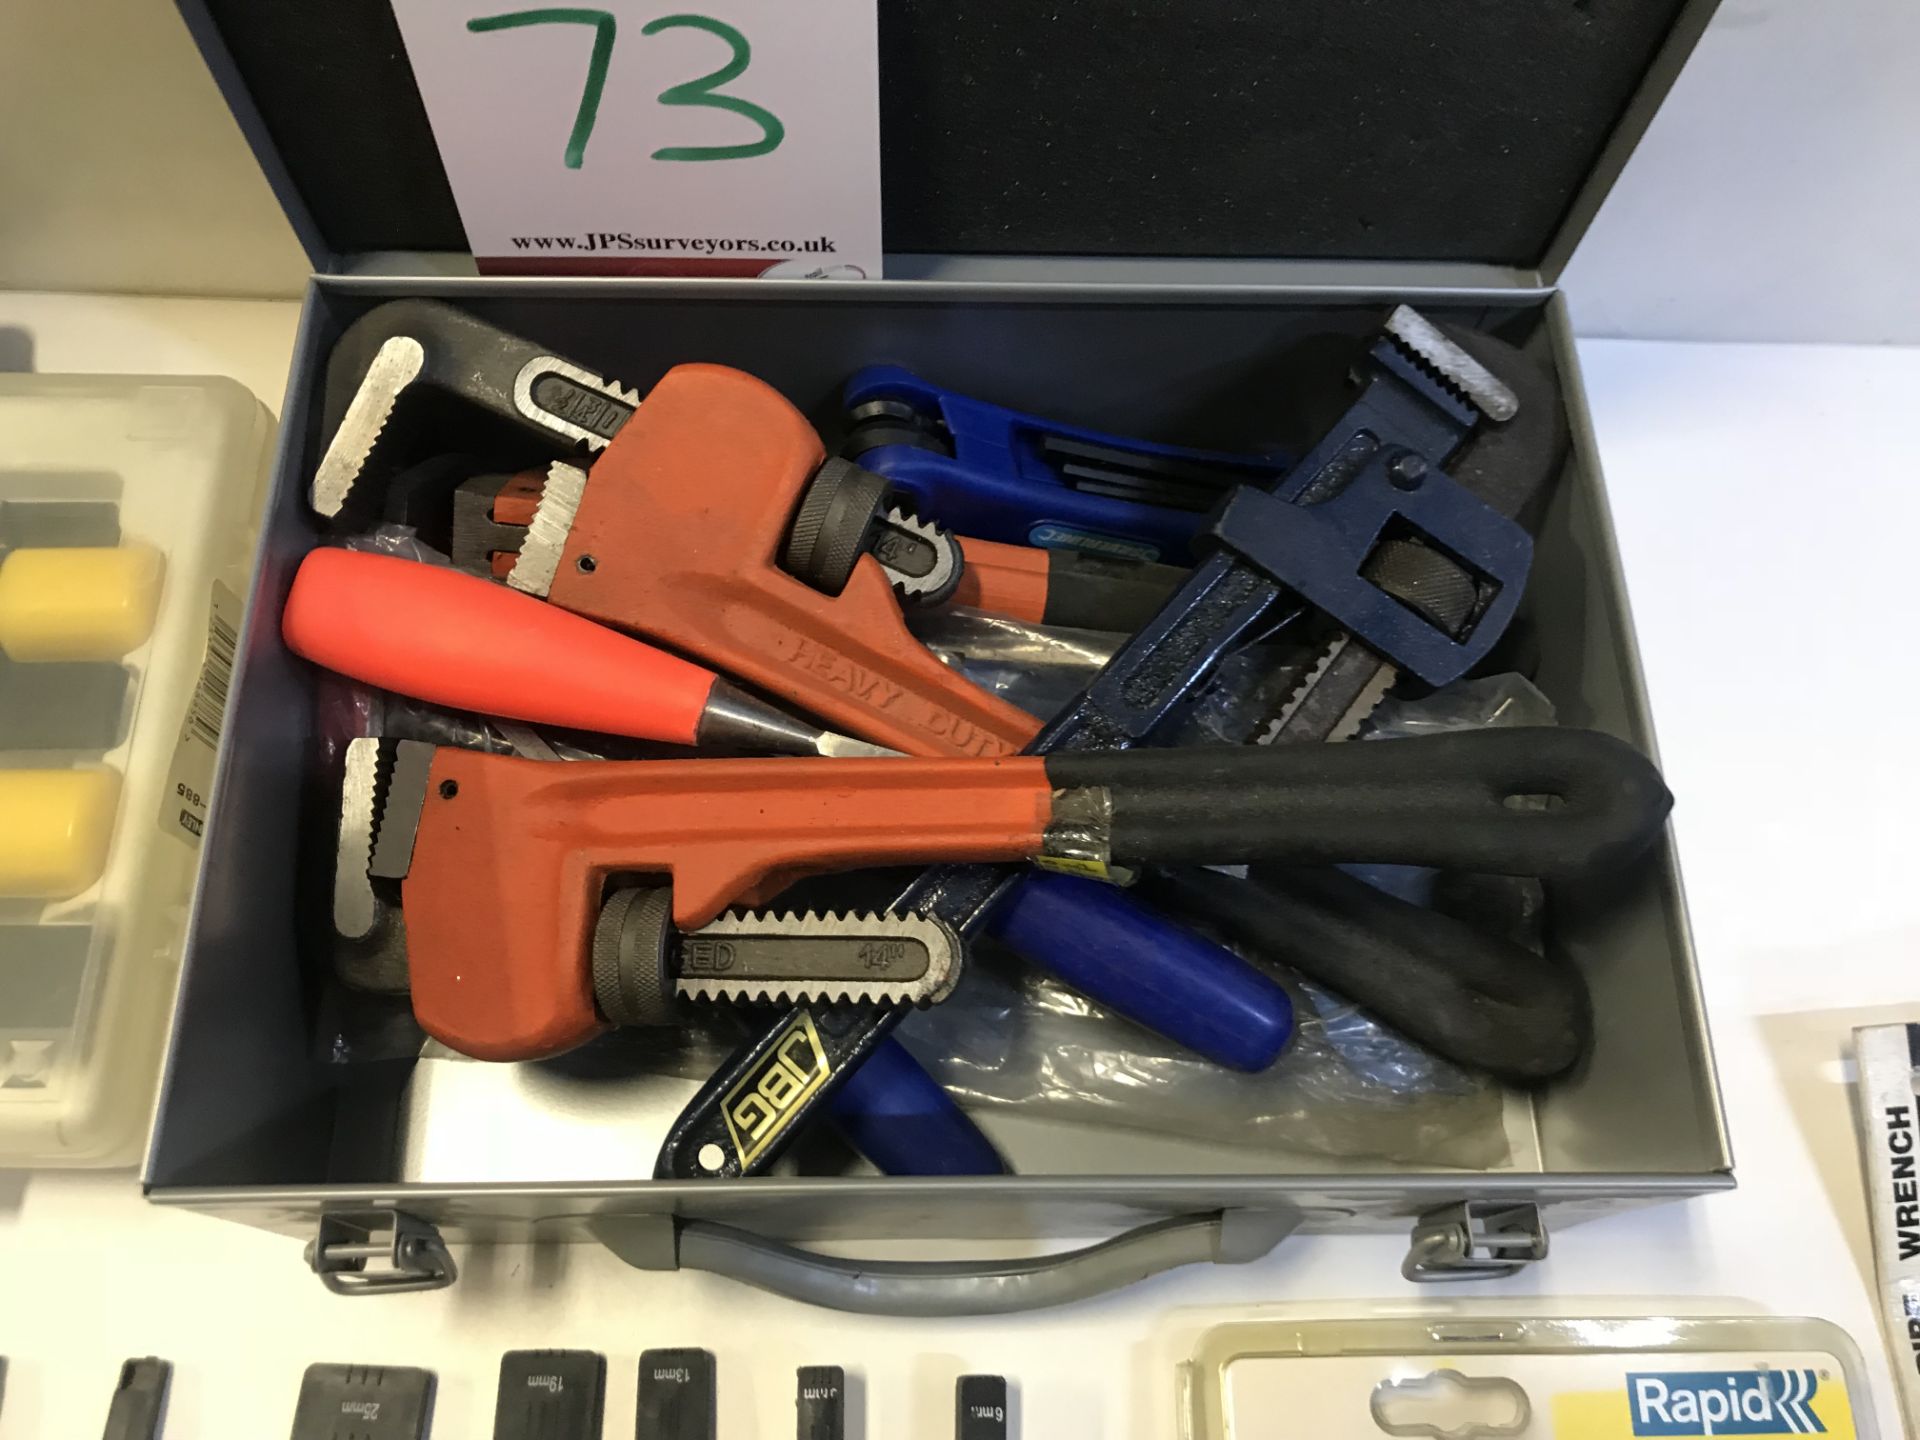 Quantity of various hand tools - Staple Gun, Wrenches, Screwdrivers & Files - as per photos - Image 4 of 5